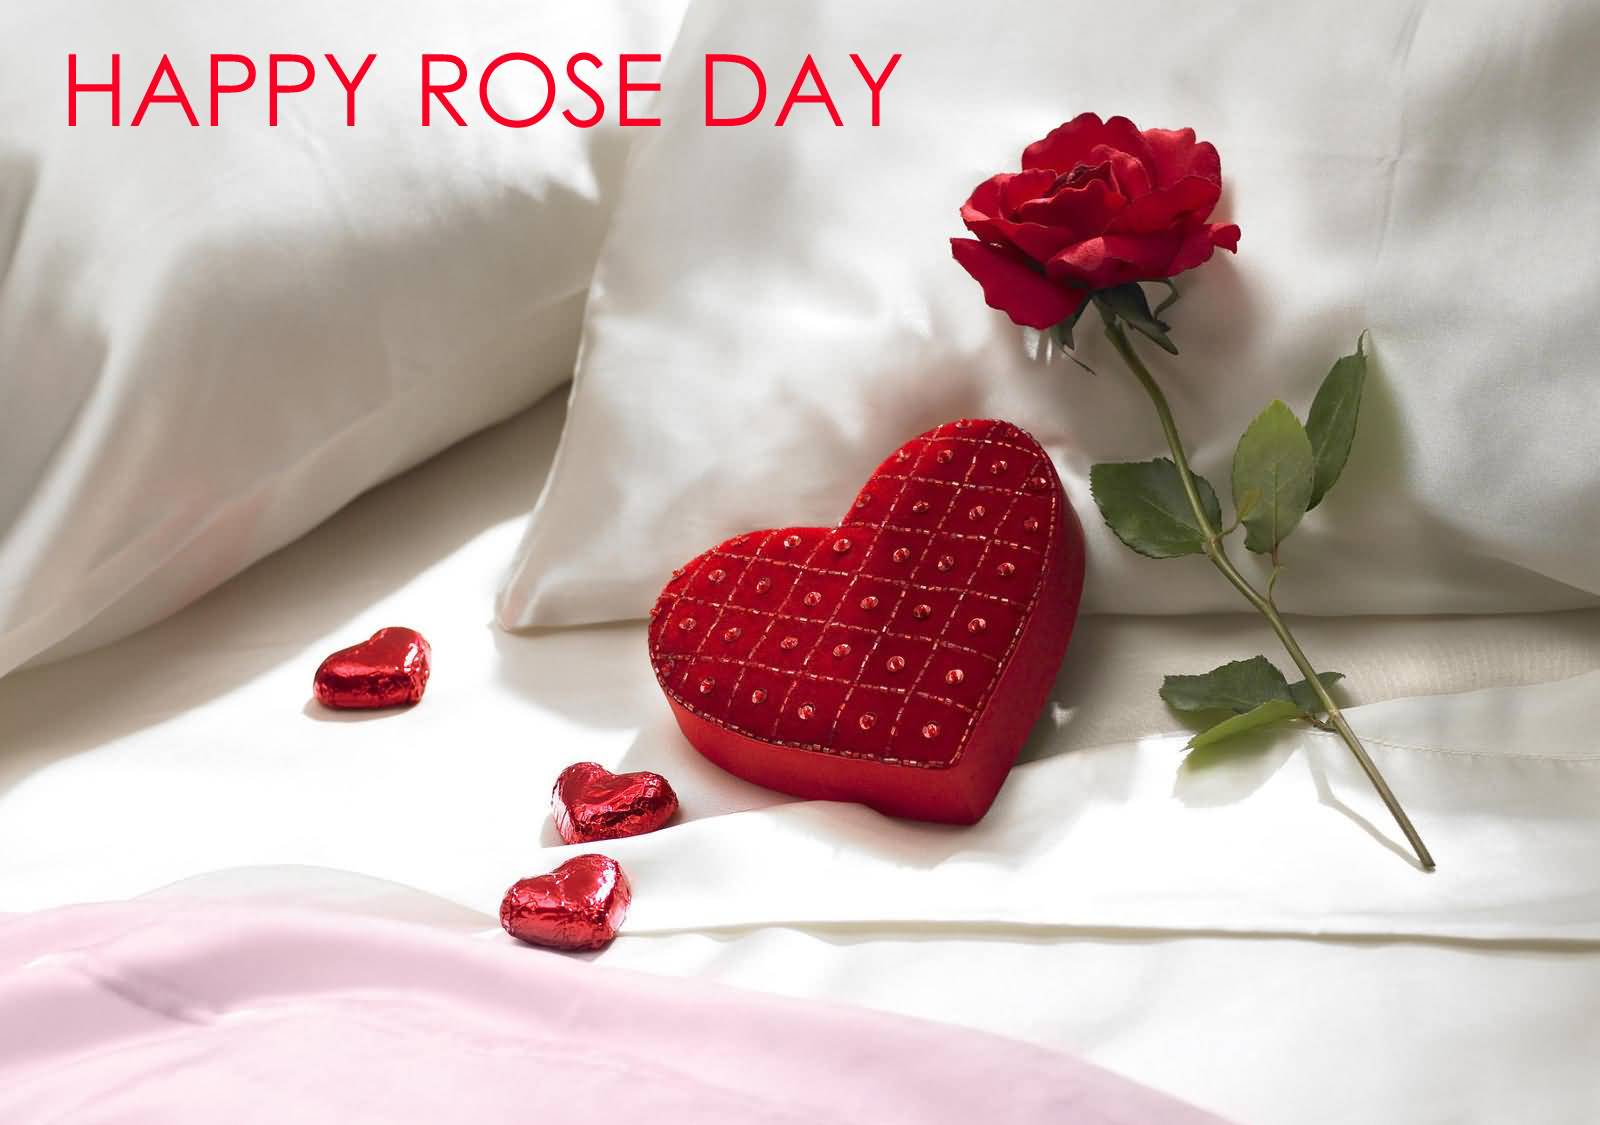 Happy Rose Day Heart Gift Box And Rose Bud